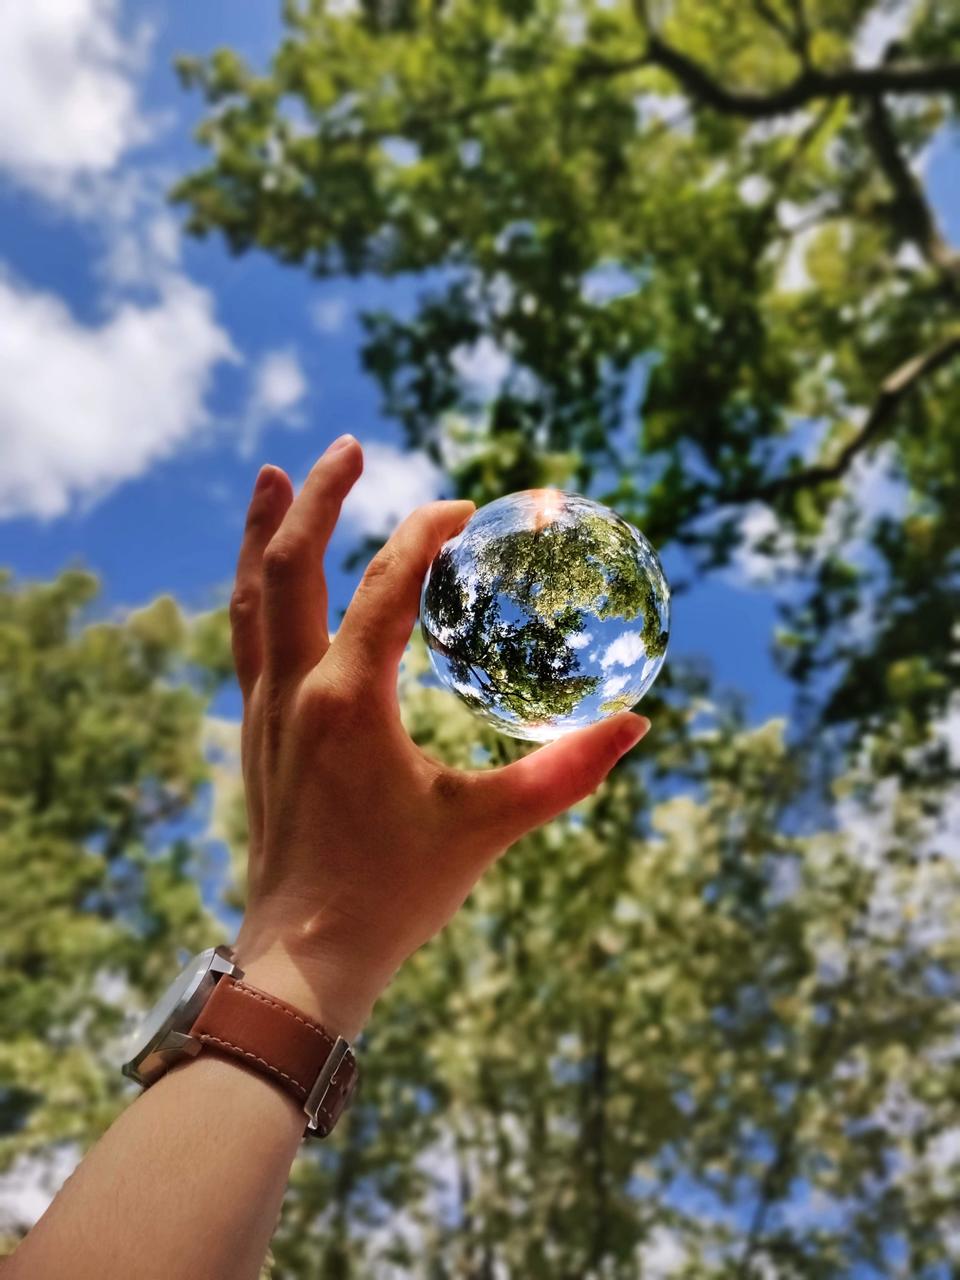 Hand reaching out to frame a soap bubble with trees